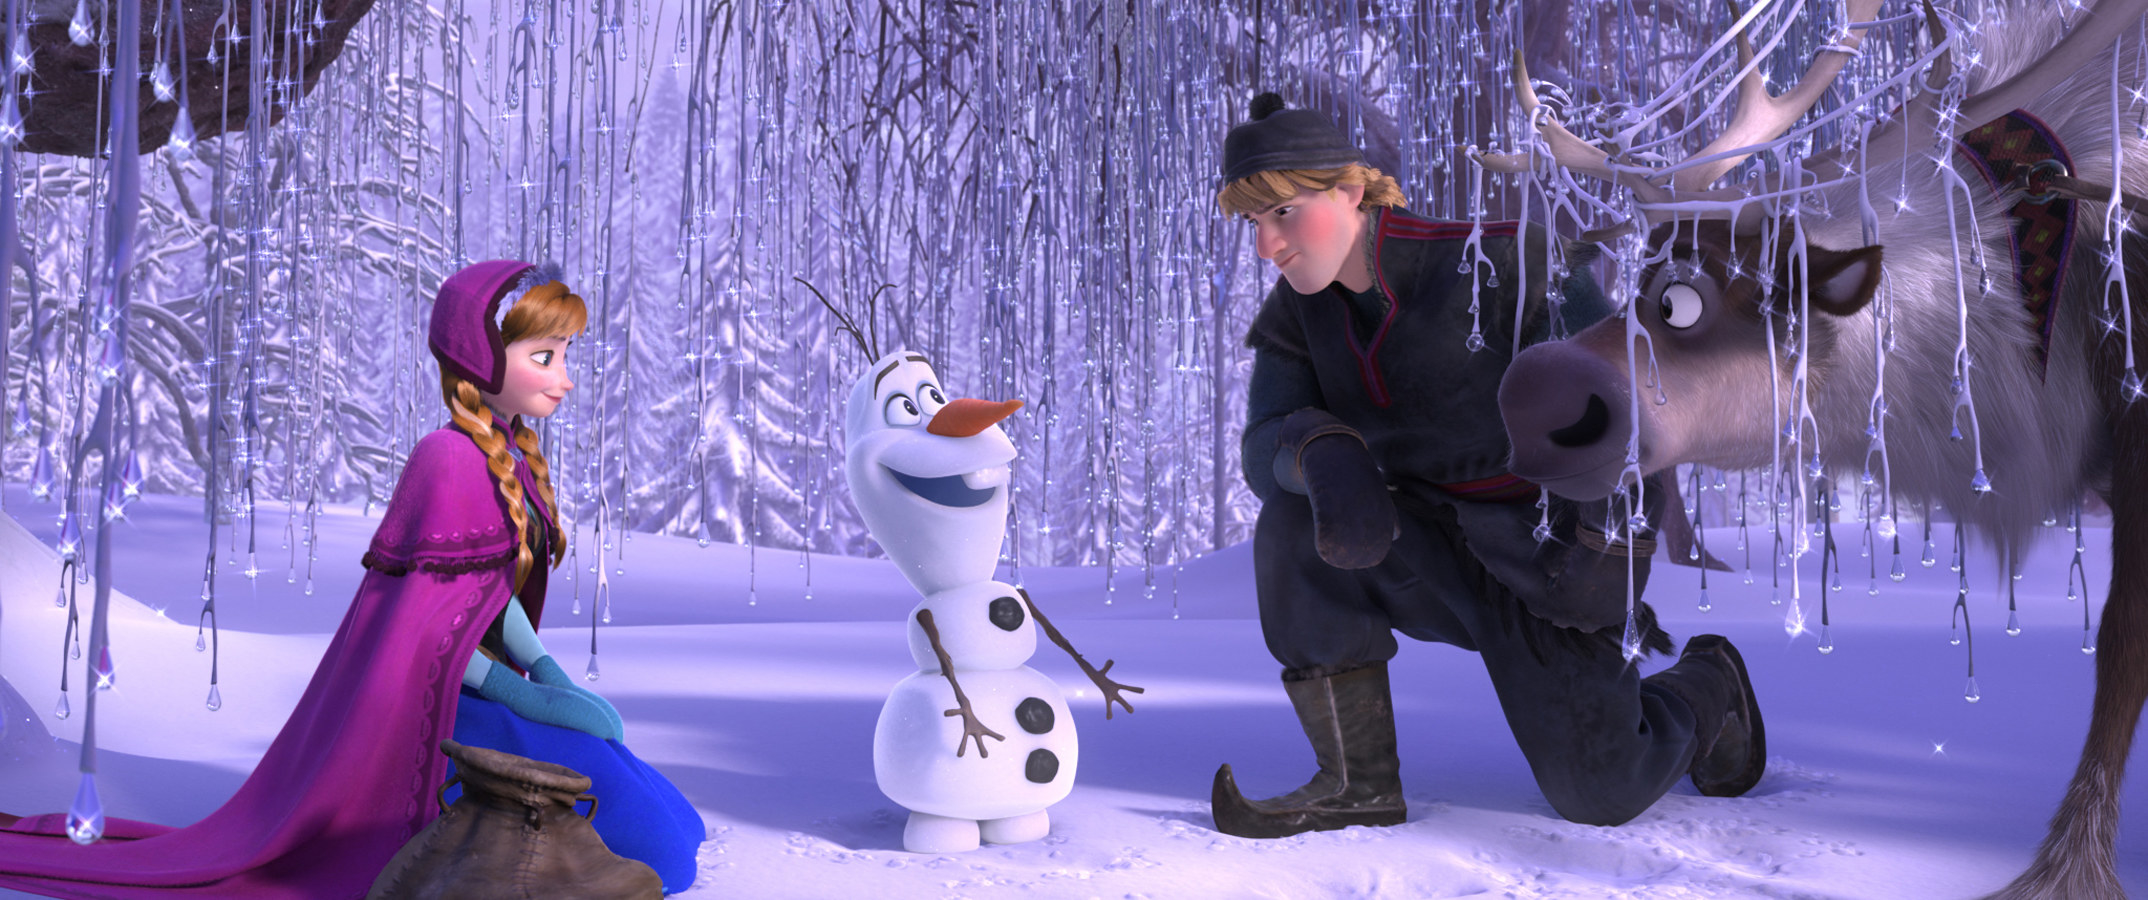 cartoon snowman talking to two characters